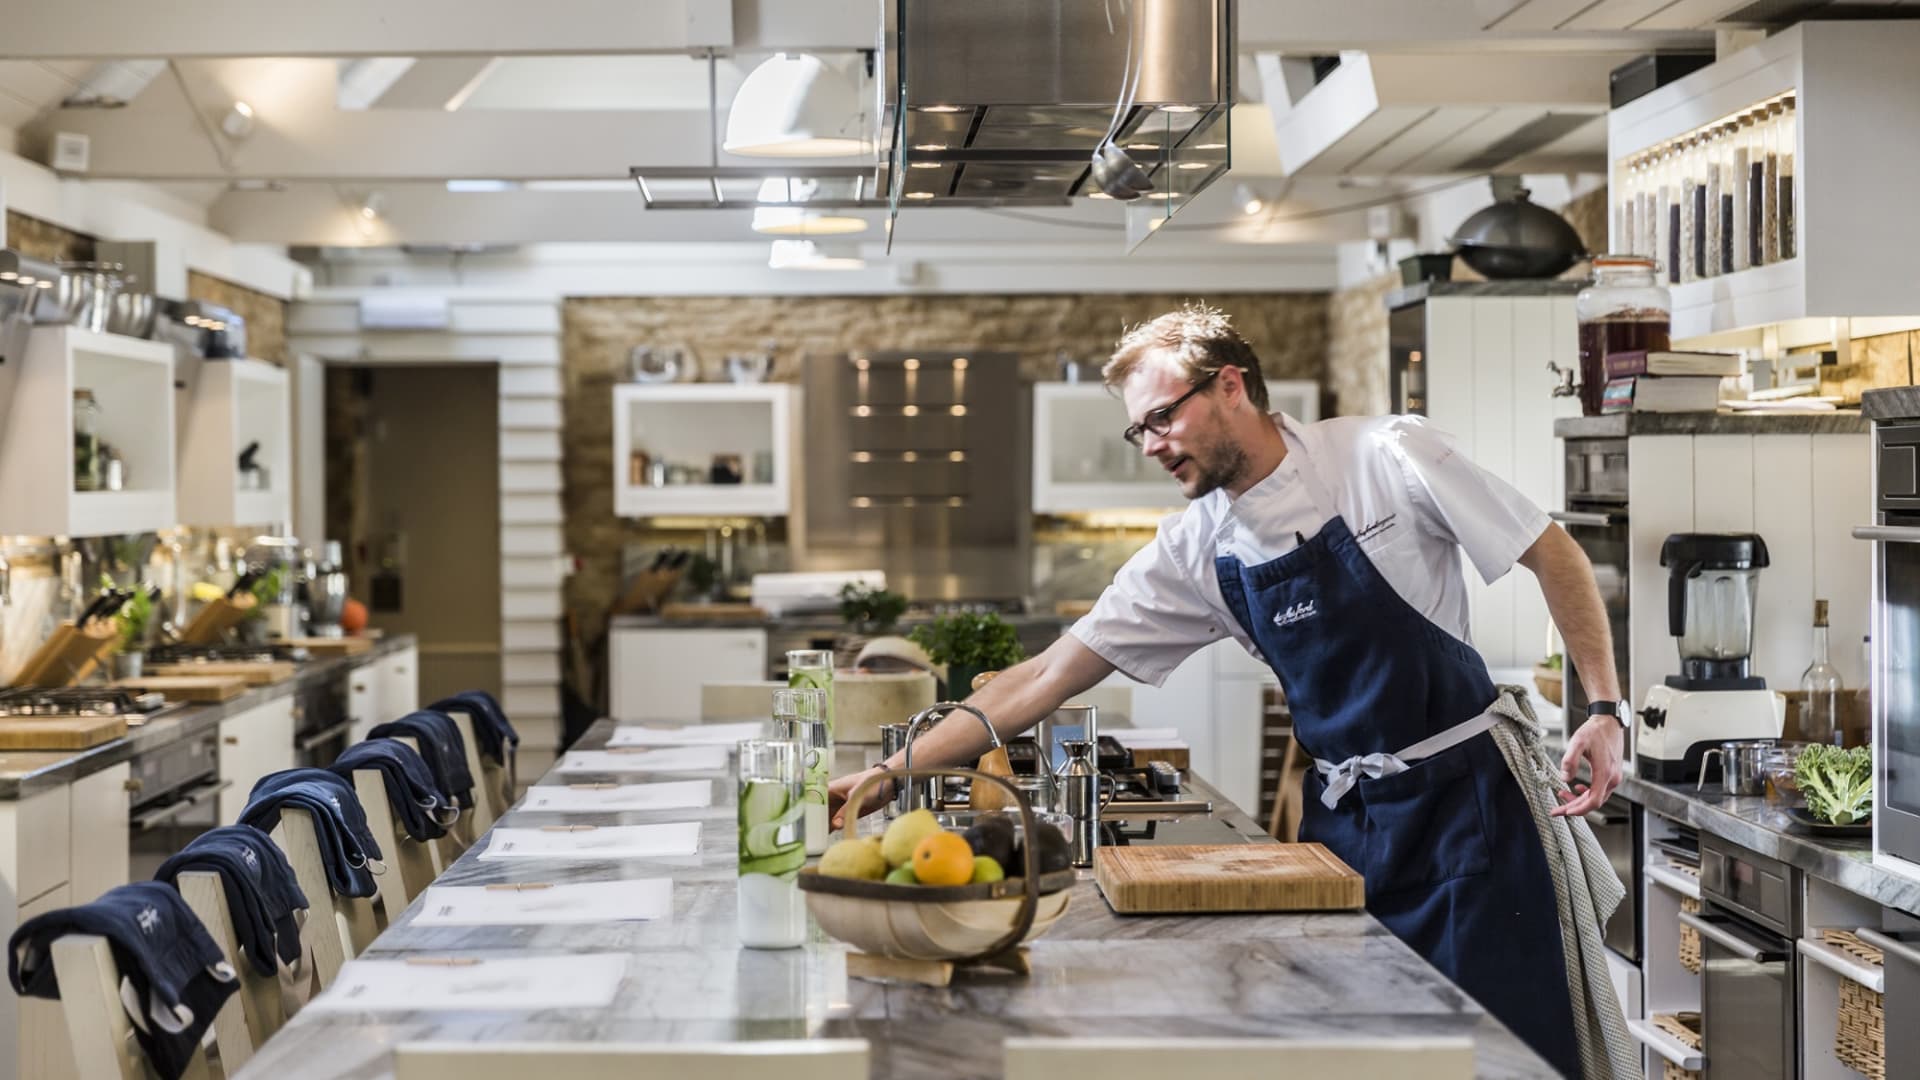 A chef prepares the table at the Daylesford cooking school in the U.K.'s Cotswolds region.